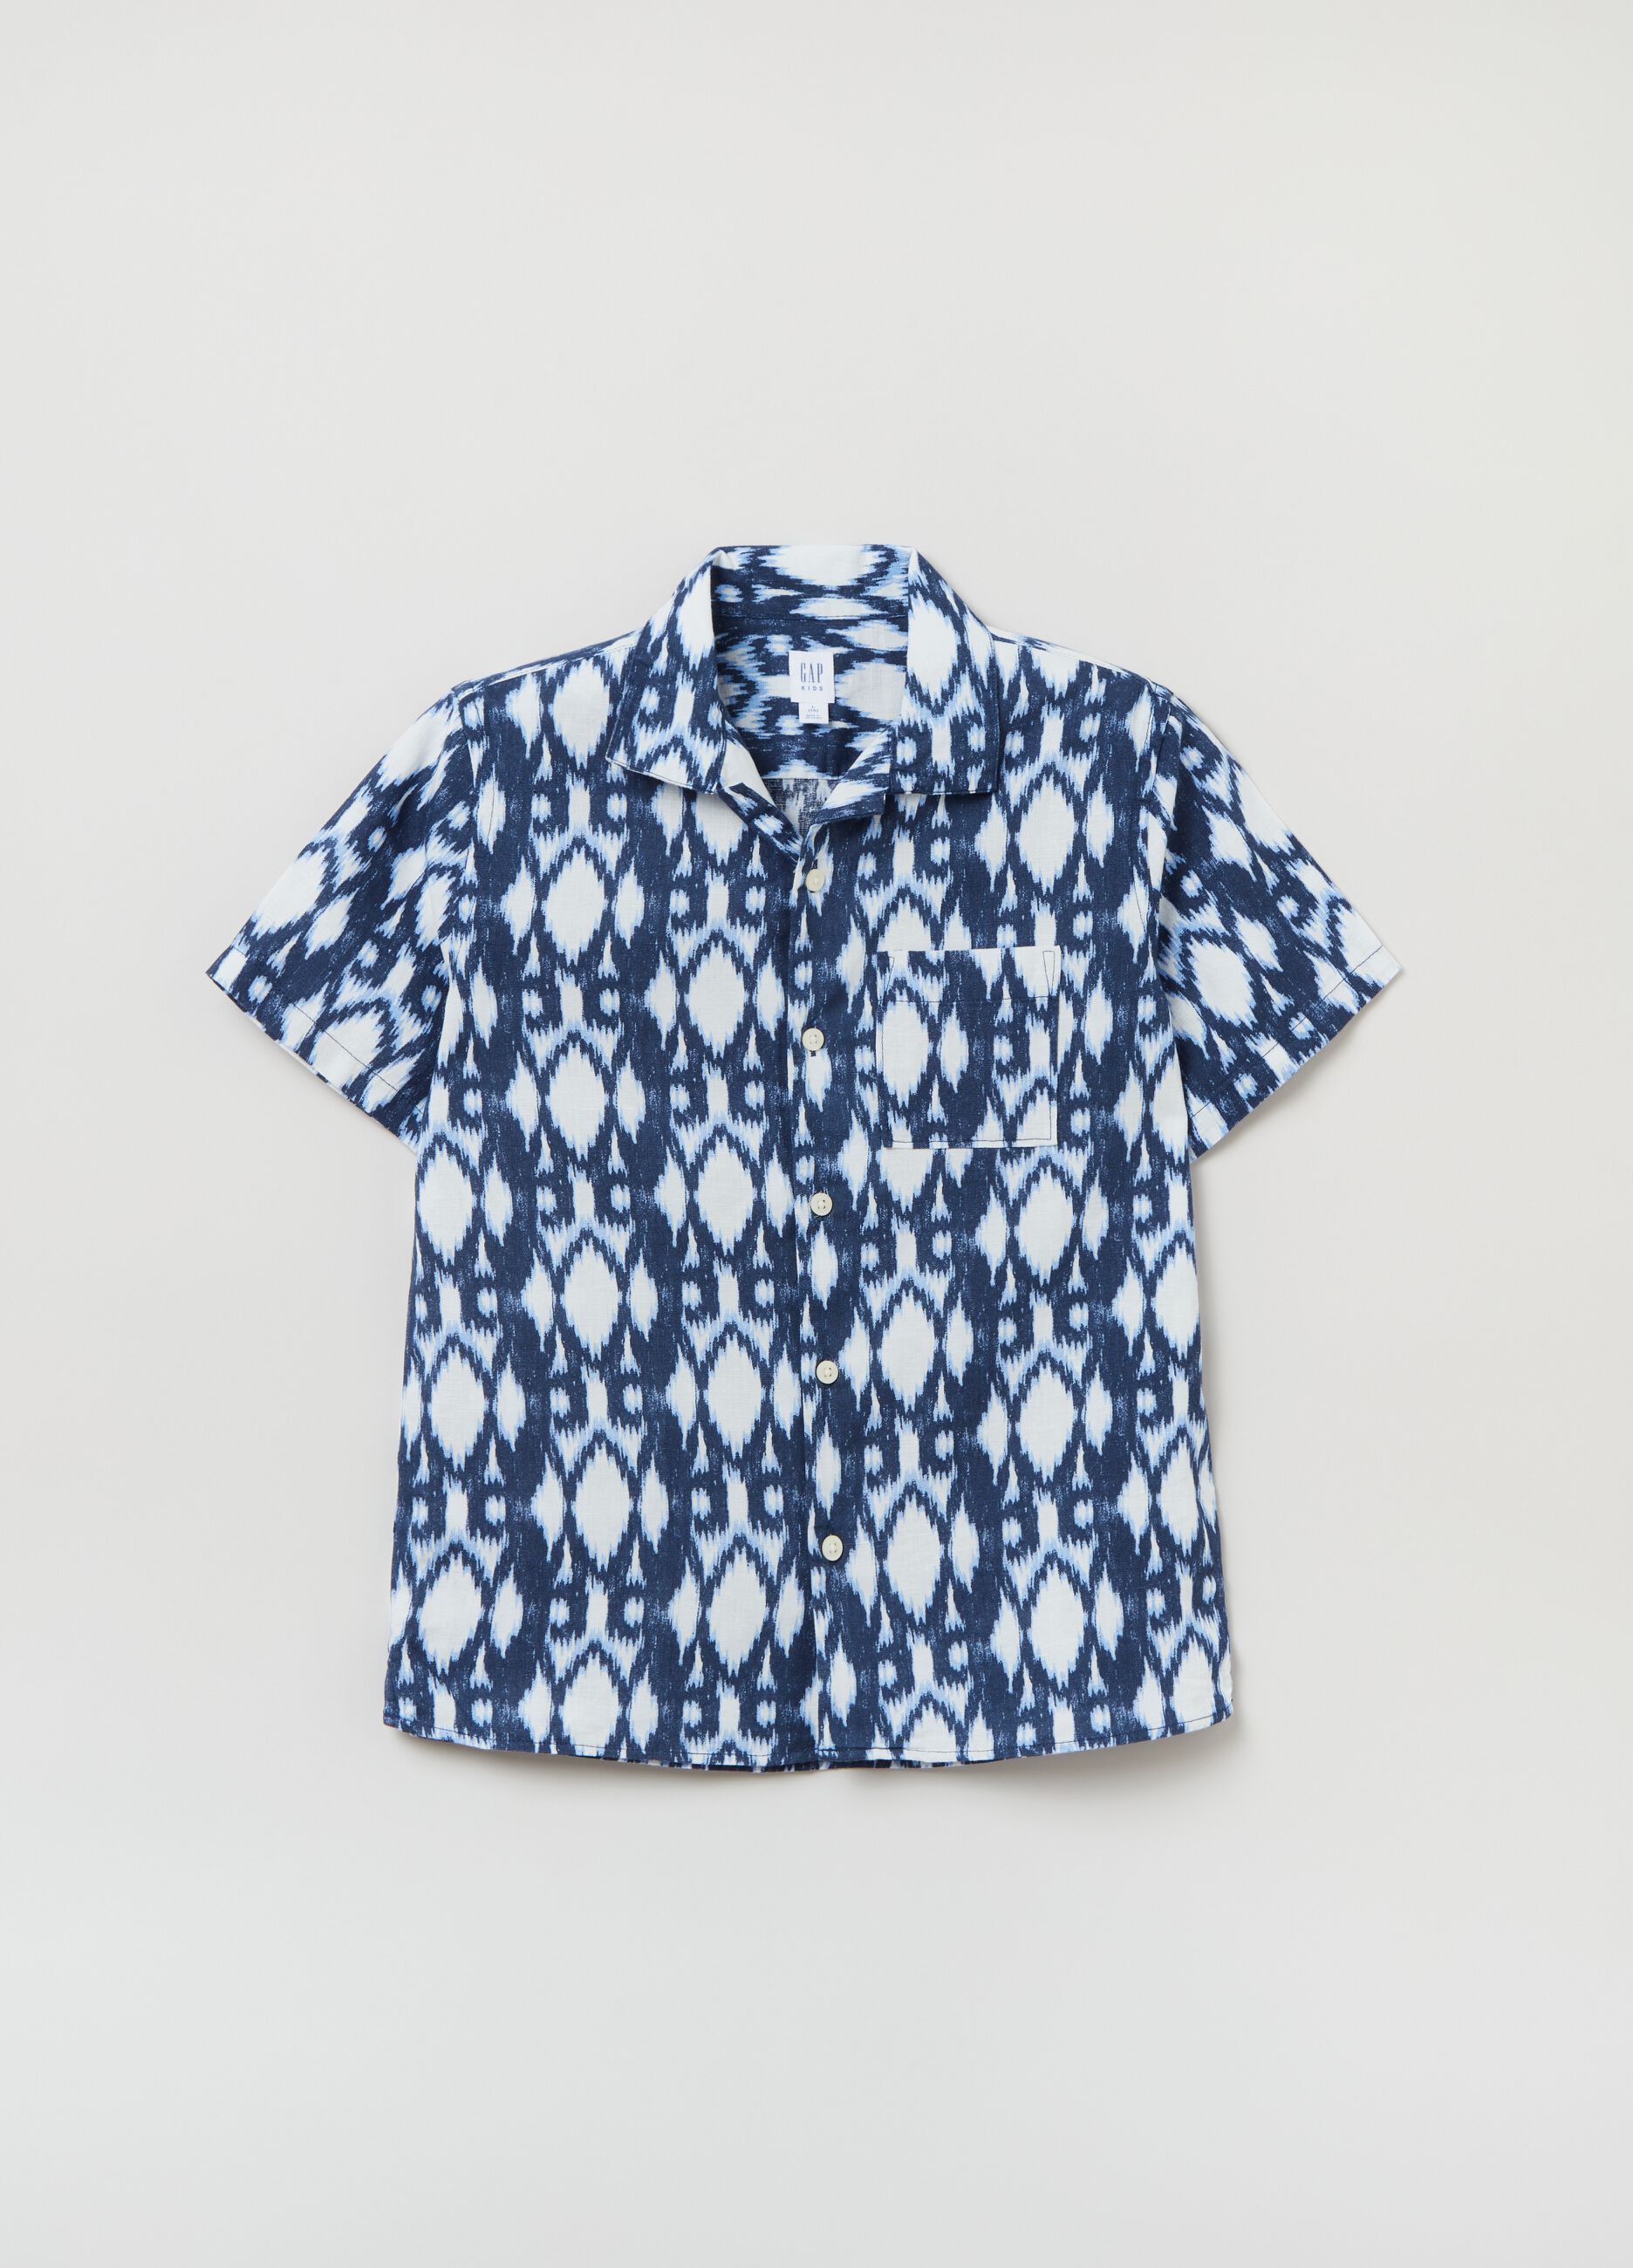 Short-sleeved shirt with print.